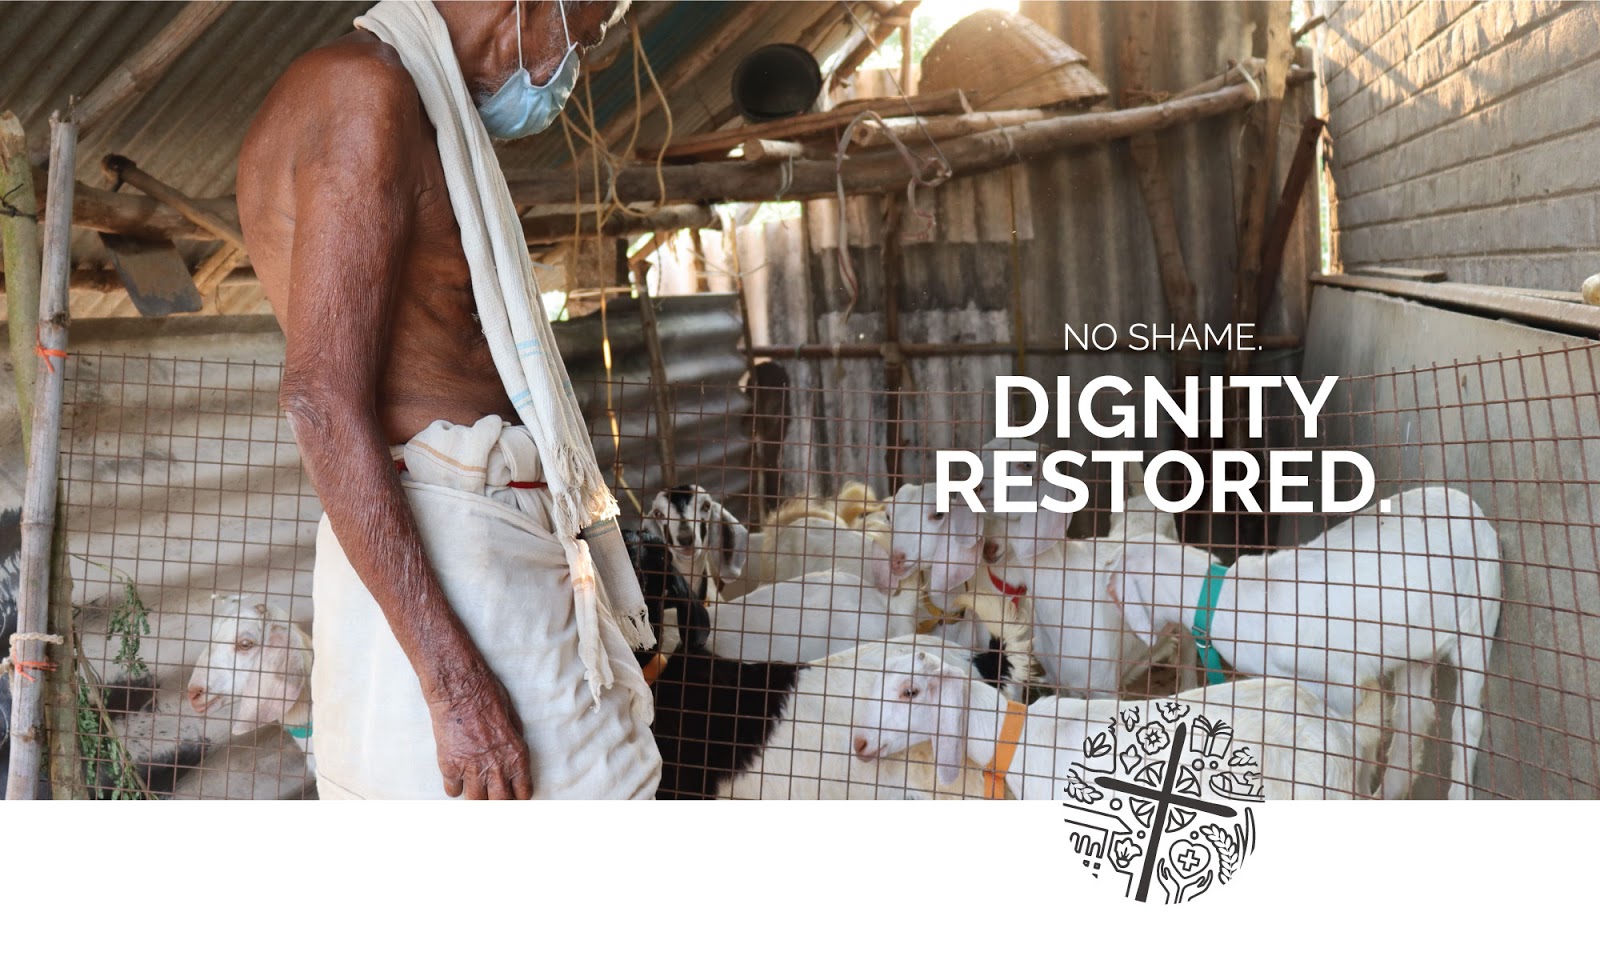 Restoring dignity, one family at a time